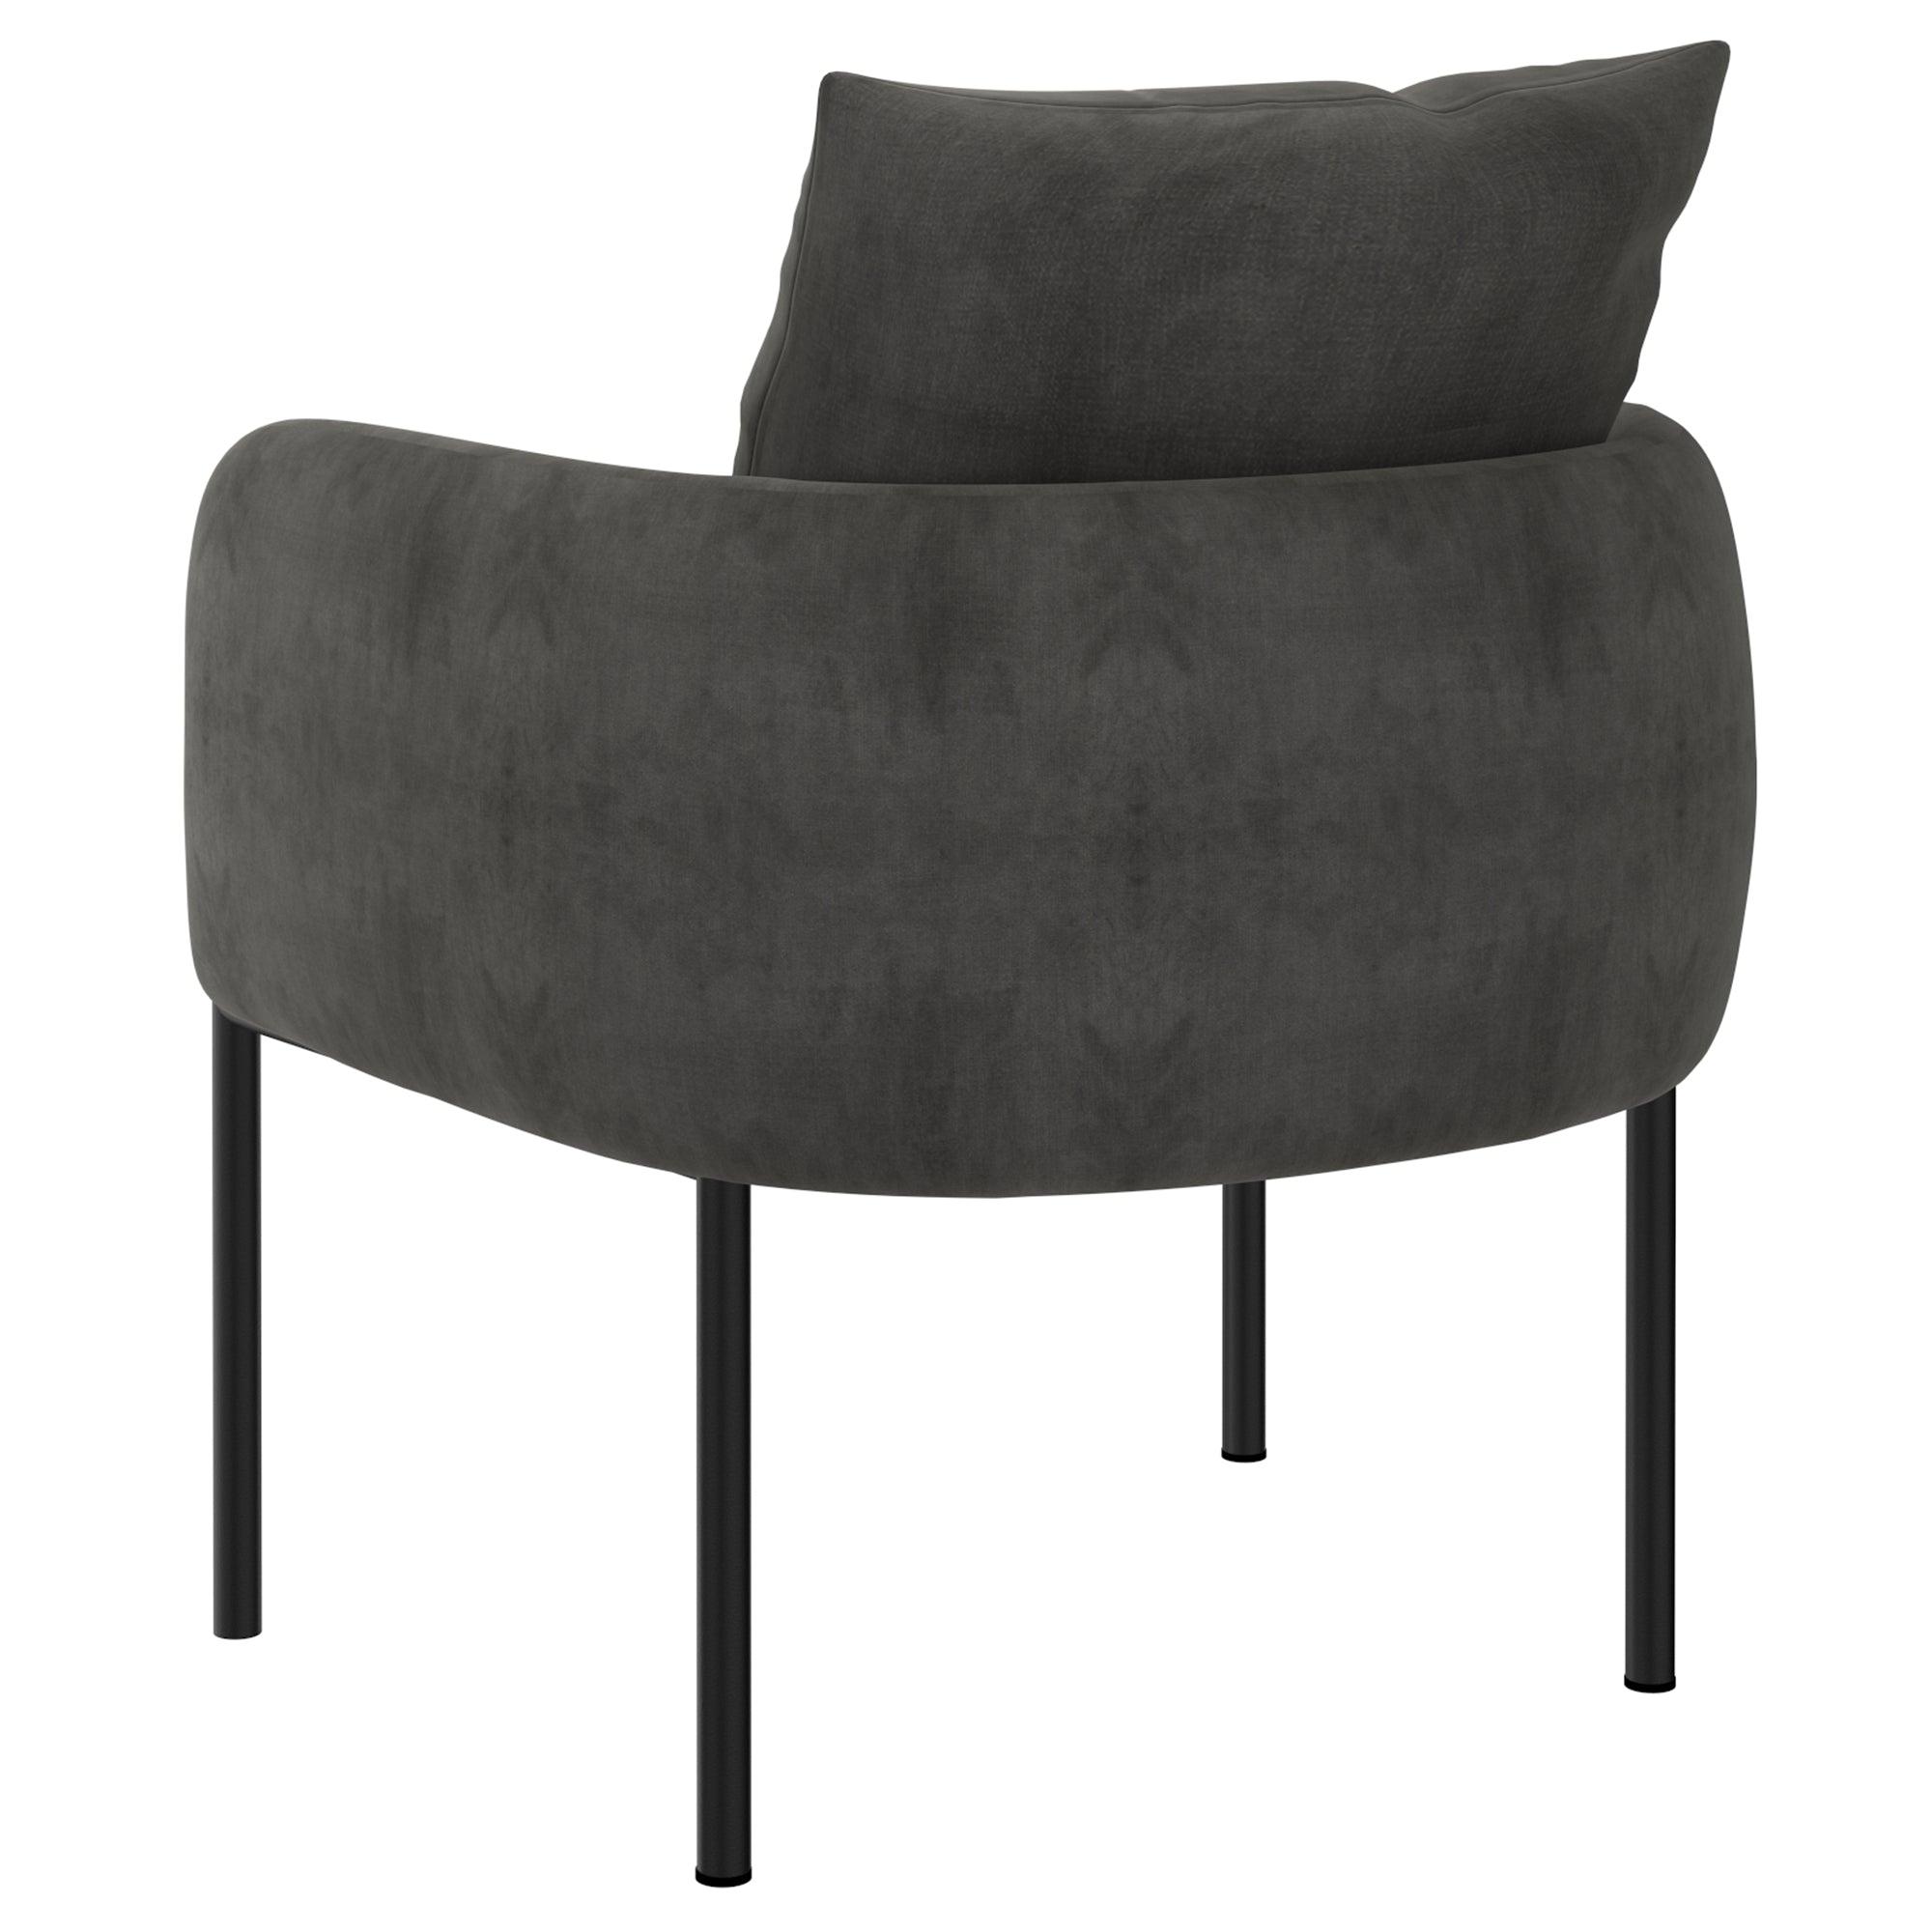 Petrie Accent Chair in Charcoal with Black Leg 403-556CH/BK